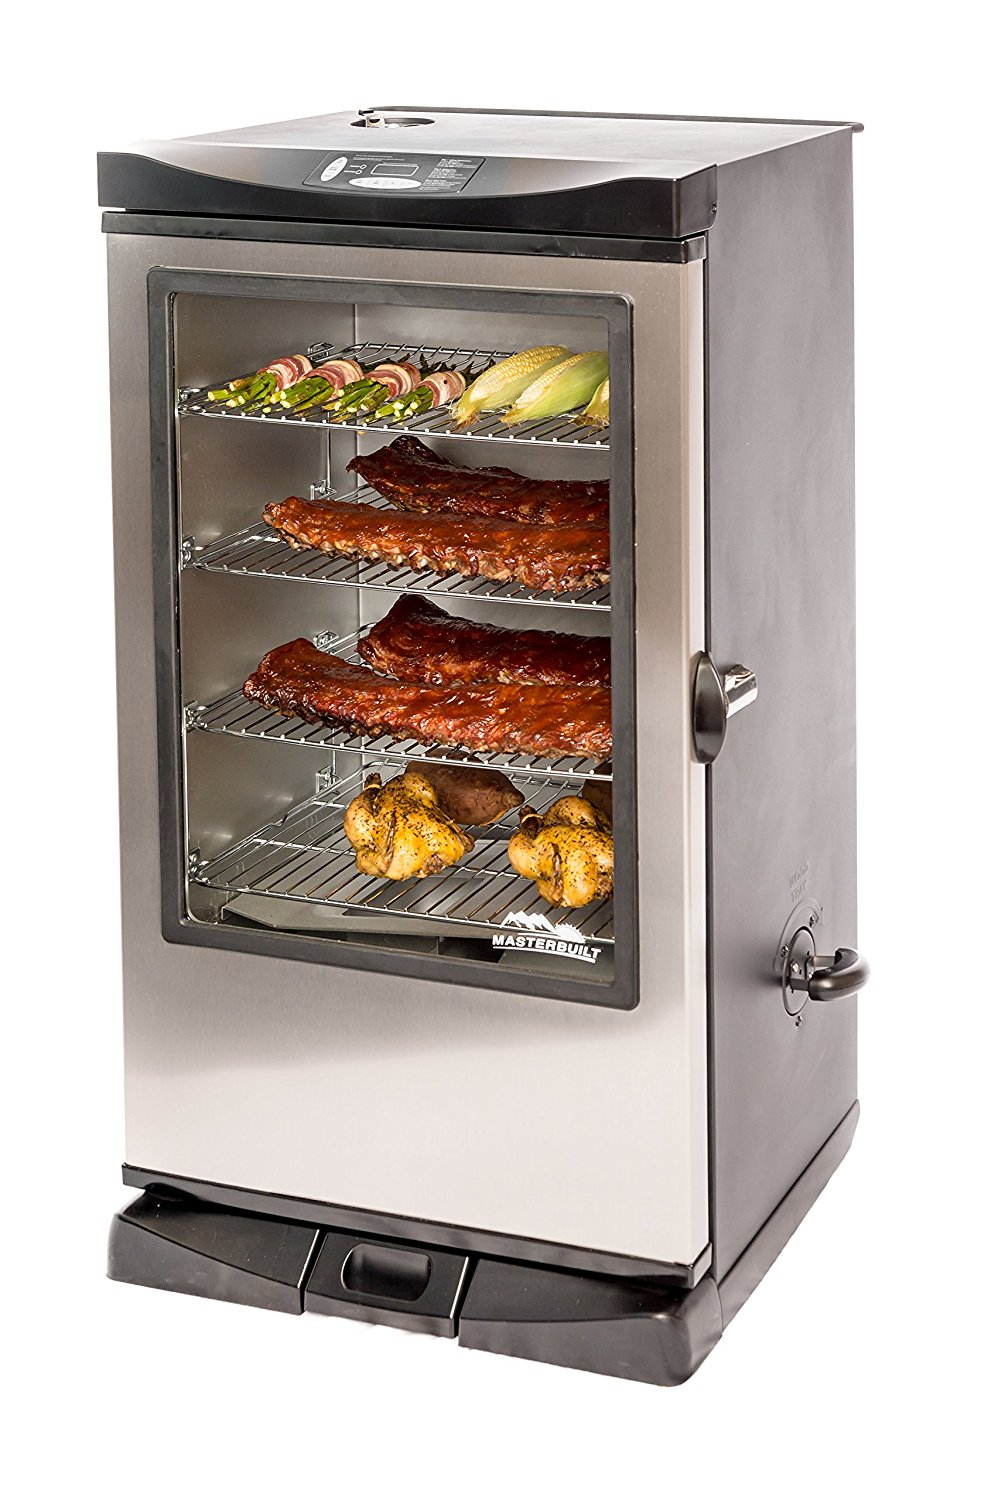 Masterbuilt front controller 40-inch smoker for $251